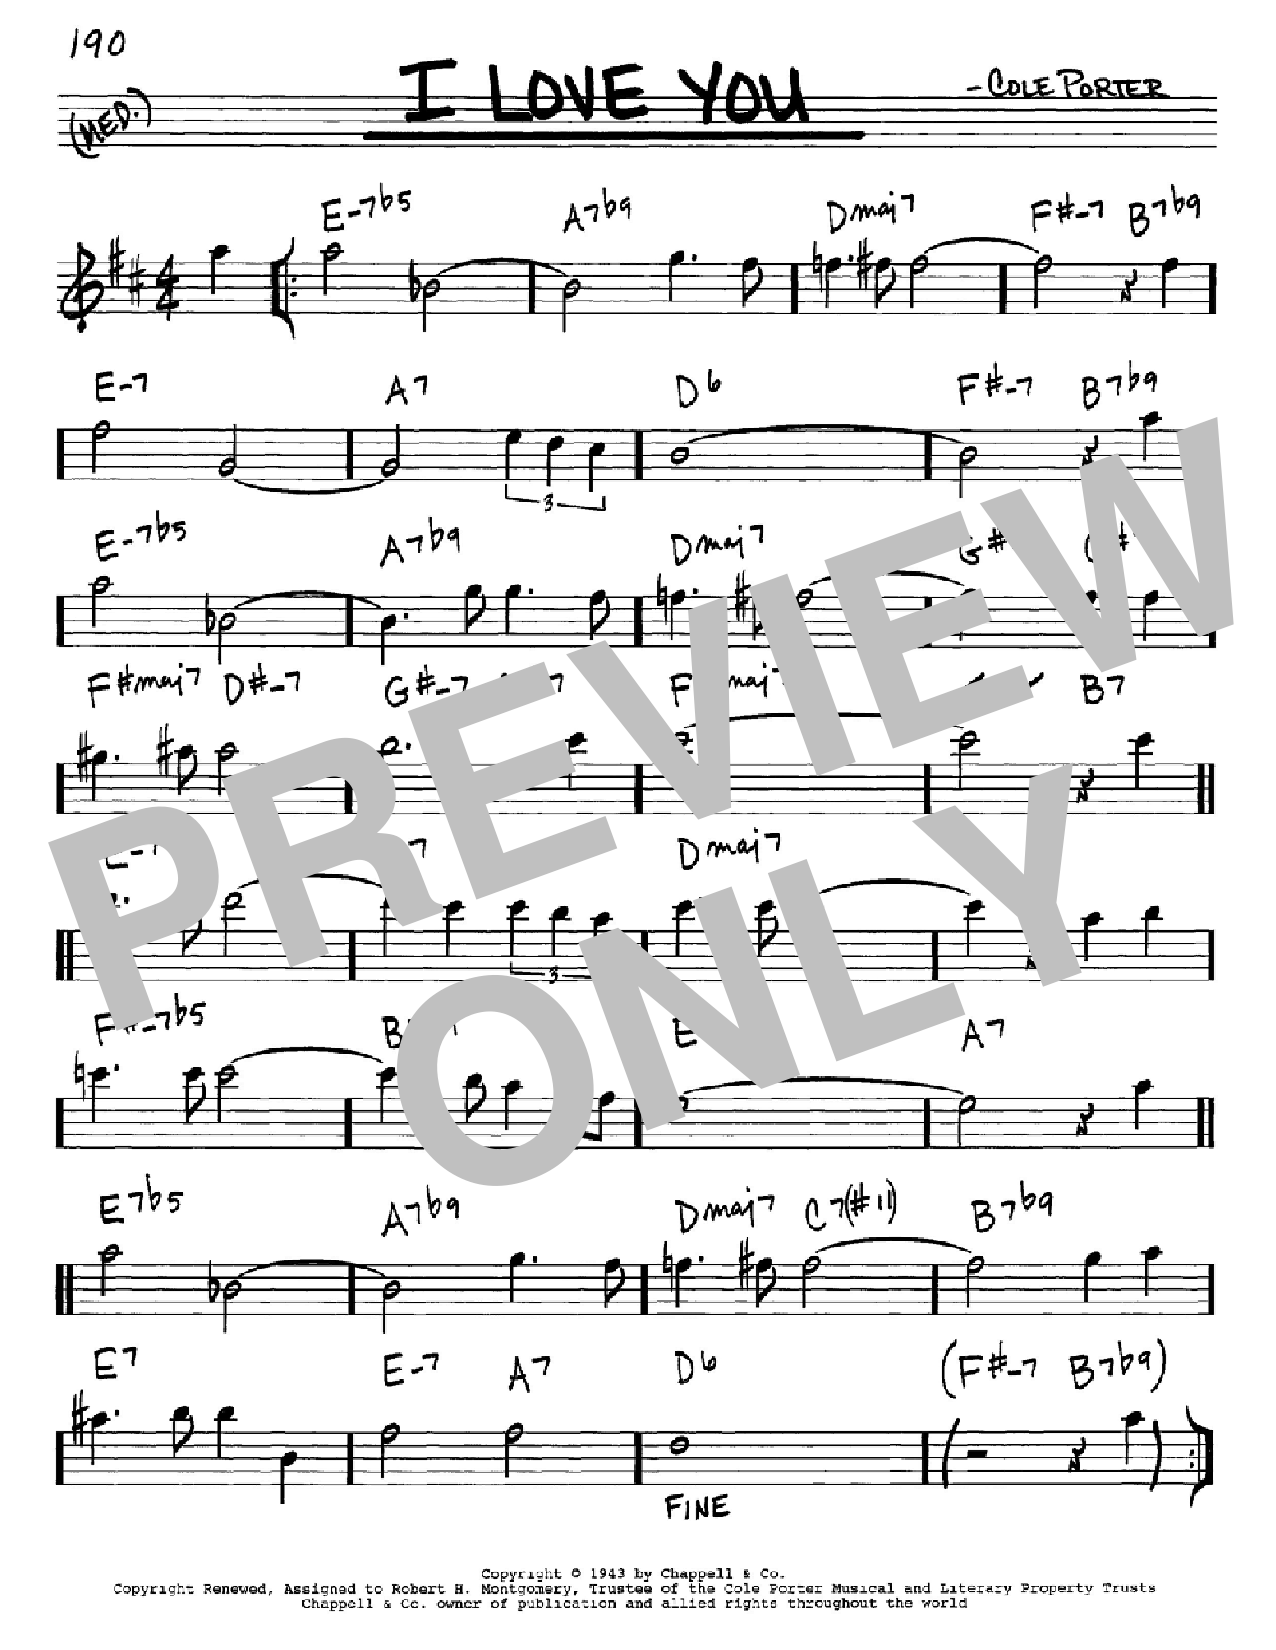 Download Cole Porter I Love You Sheet Music